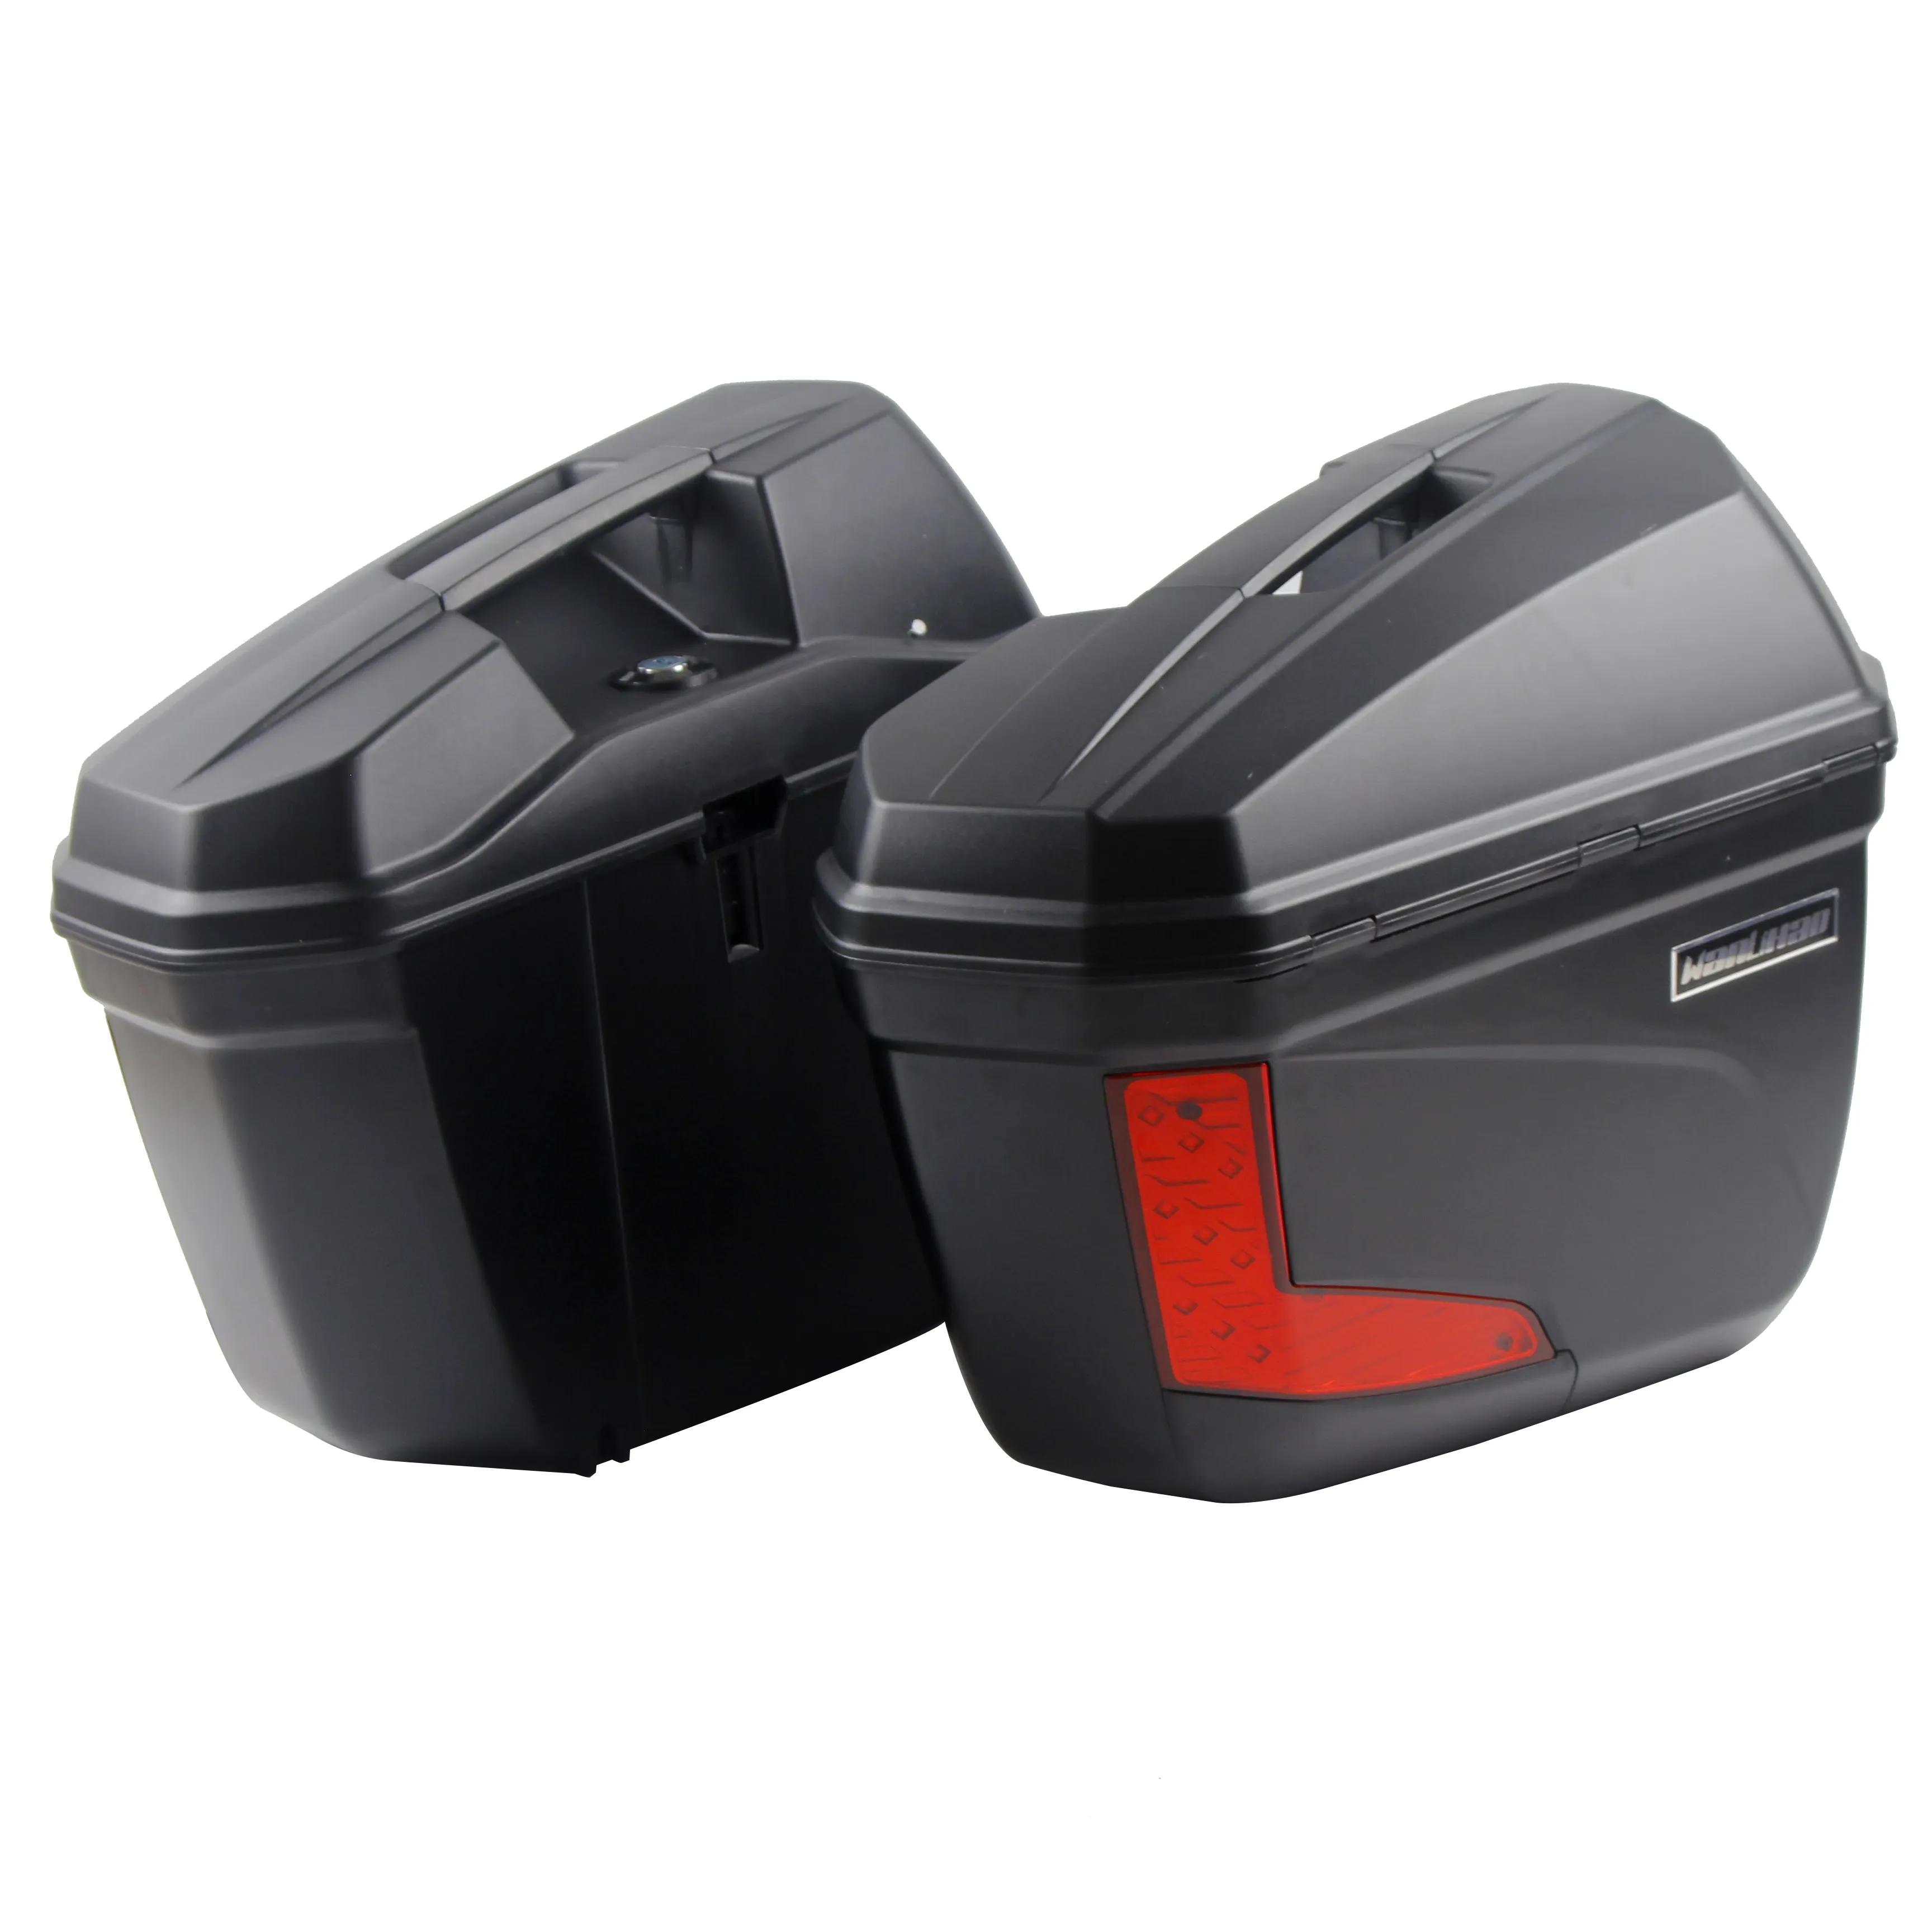 With LED light Aerodynamic Motorcycle Side Box Case Fit For Most Motorcycle Bikes